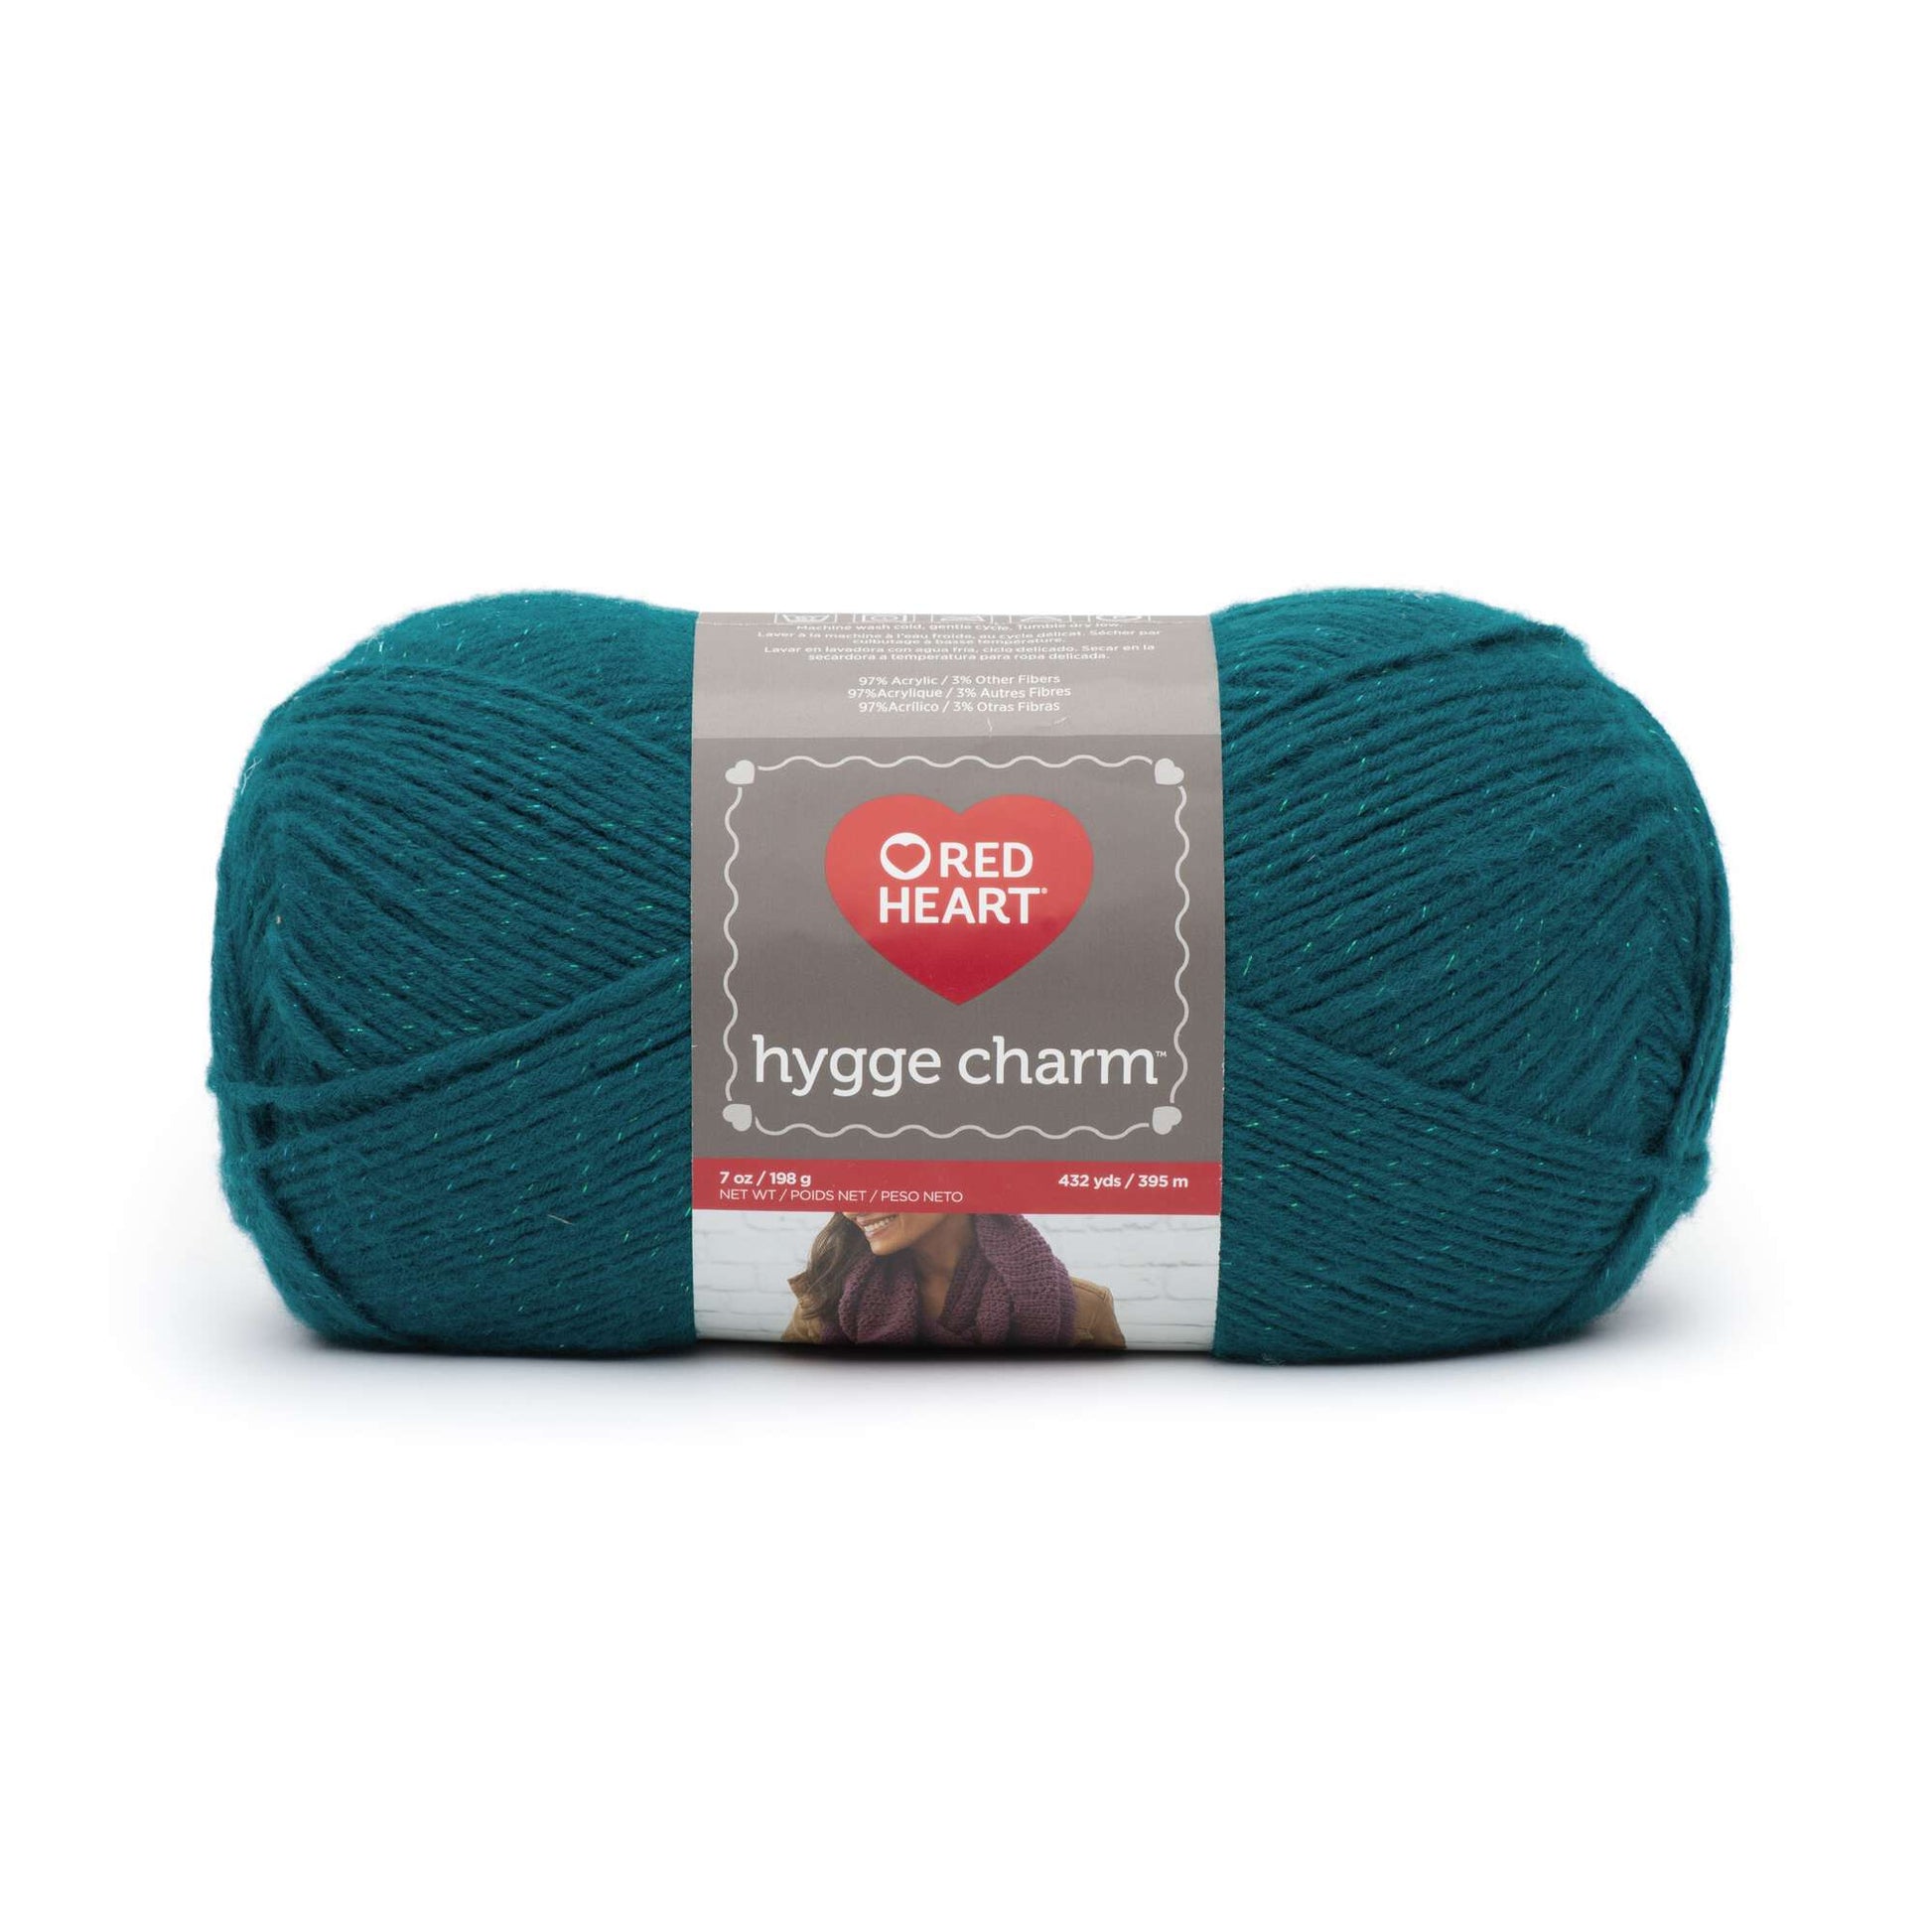 Red Heart Hygge Charm Yarn - Clearance shades Eclipse